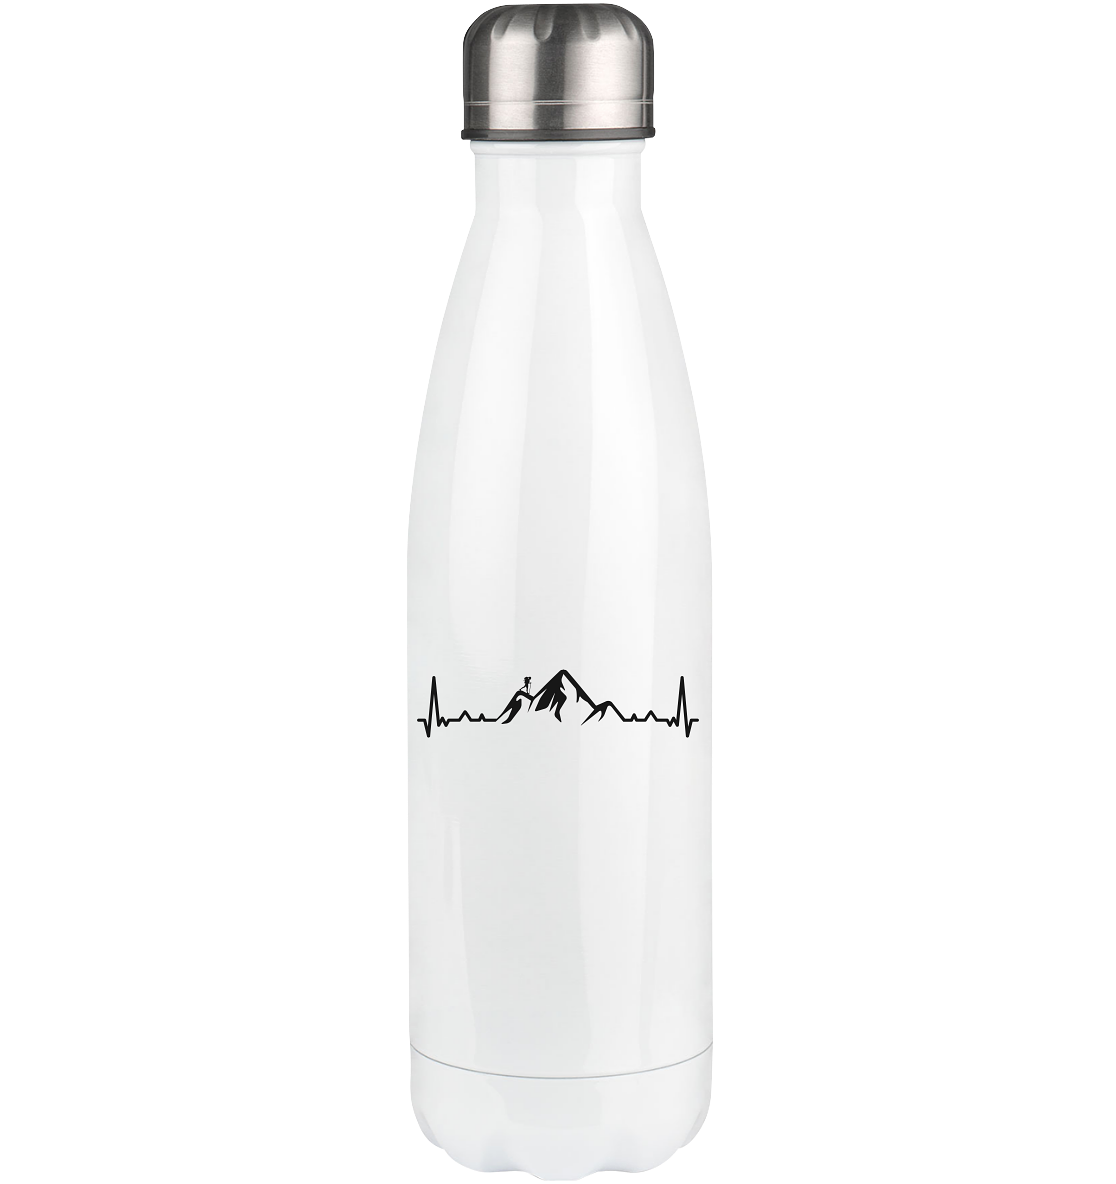 Heartbeat Mountain and Hiking - Edelstahl Thermosflasche wandern 500ml